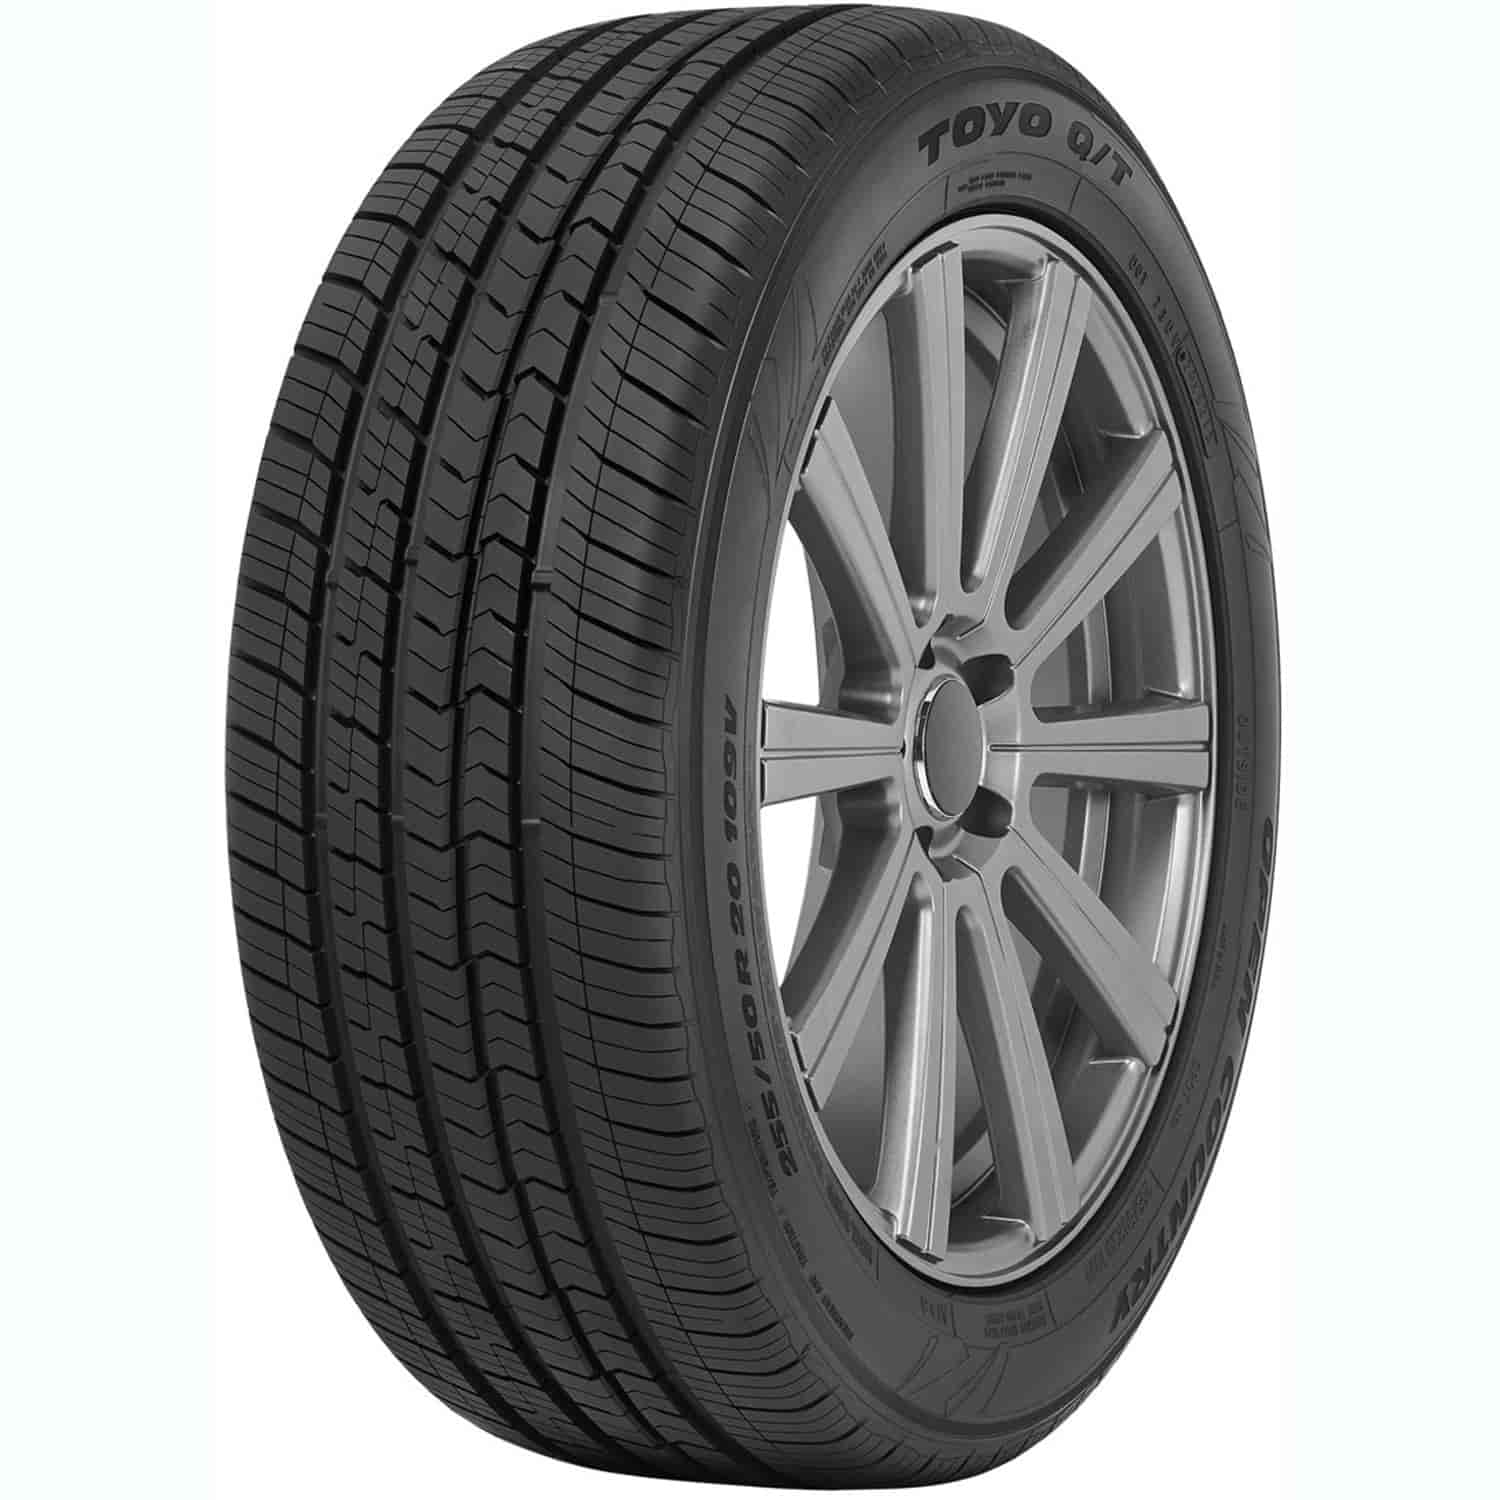 OPEN COUNTRY Q/T 235/55R19 105V XL